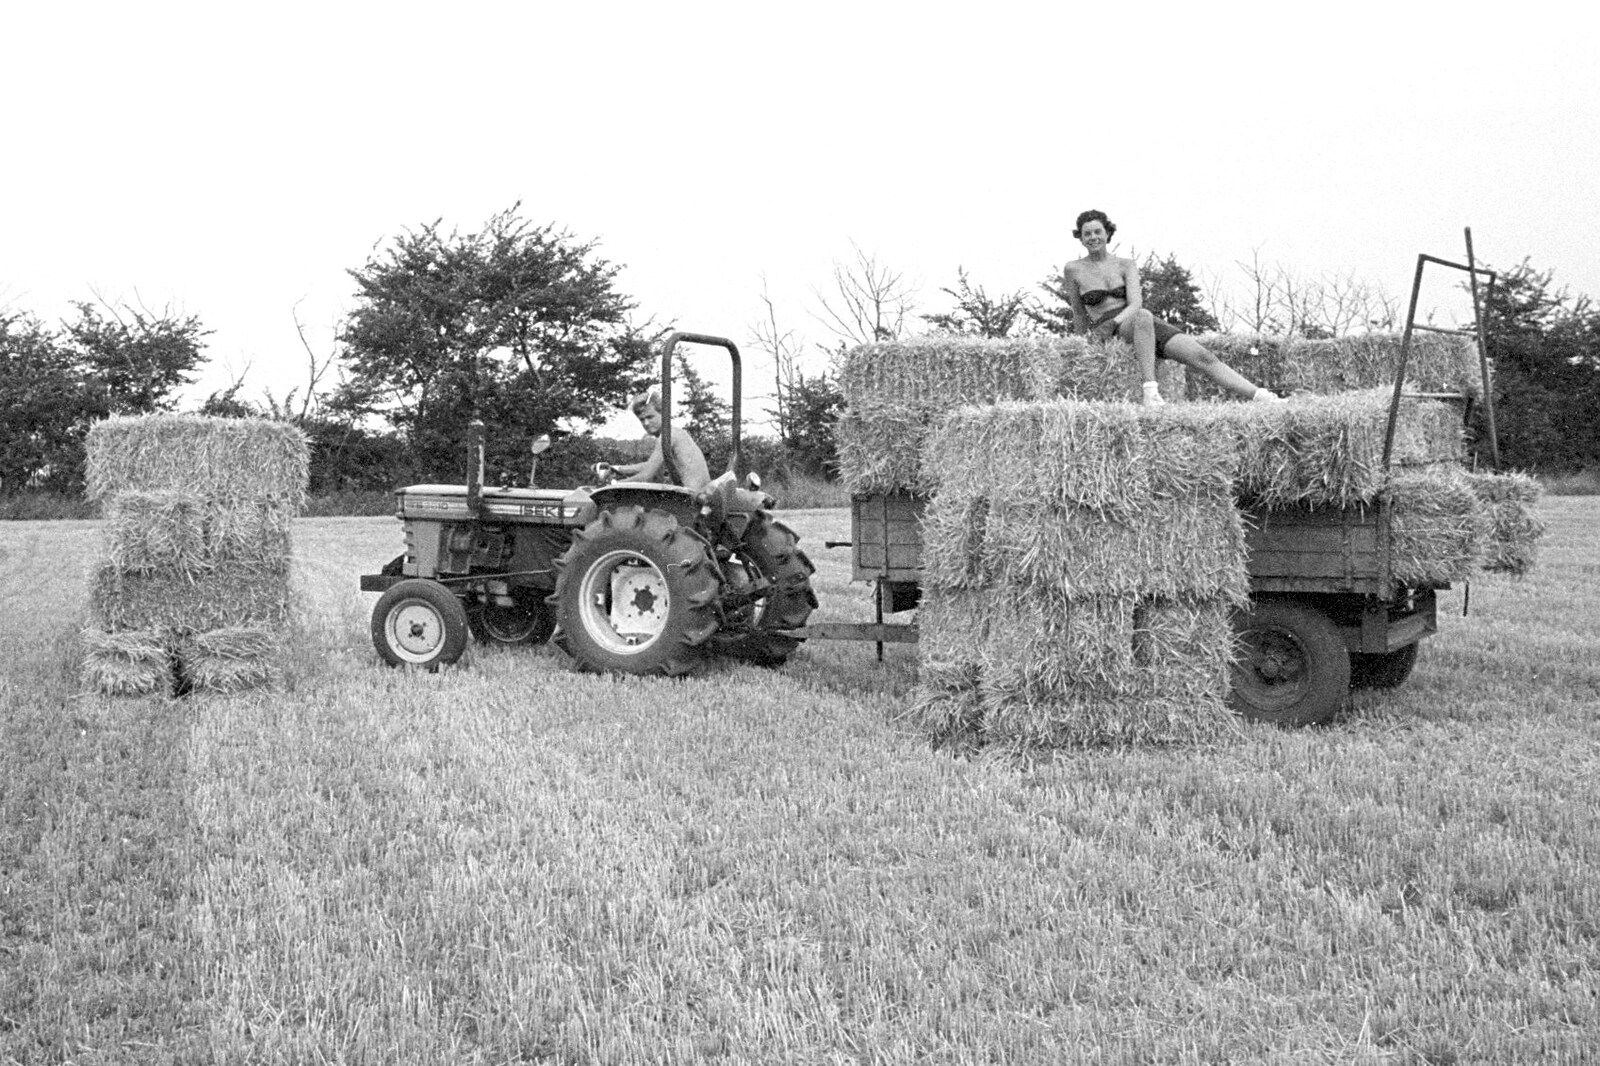 Nosher drives the tractor around the field from Working on the Harvest, Tibenham, Norfolk - 11th August 1992